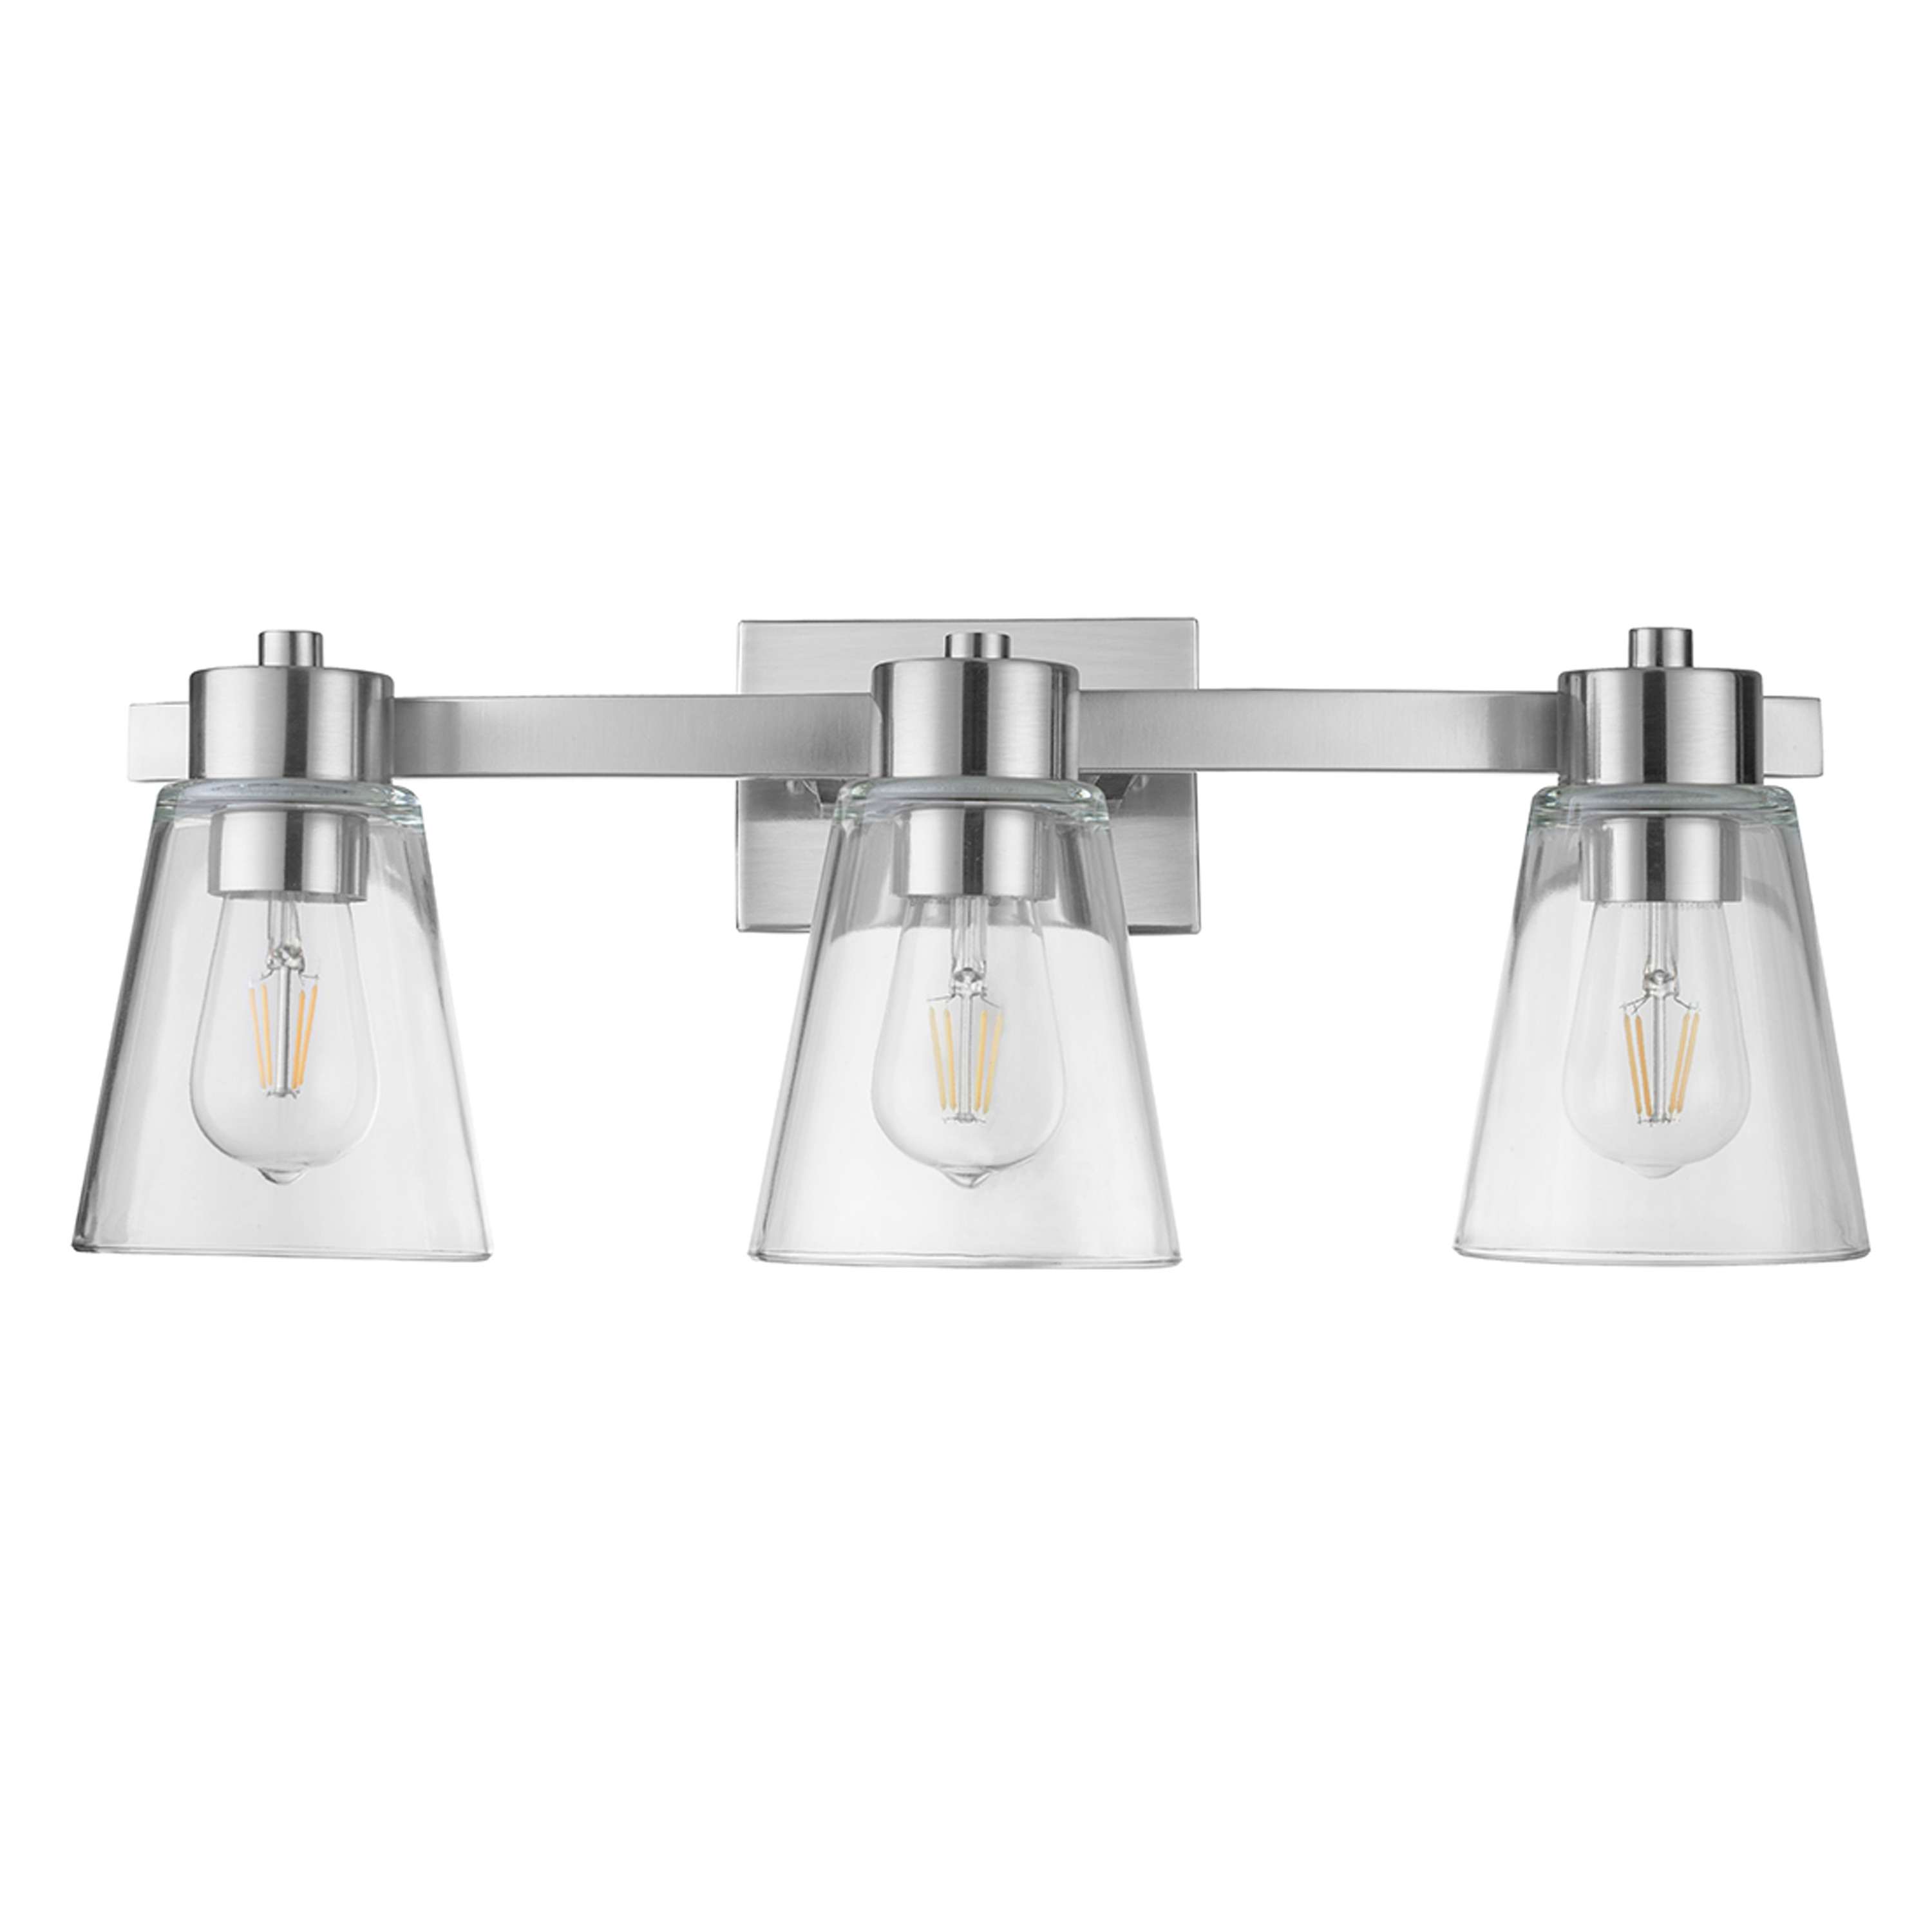 3-Light LED Vanity Fixture Brushed Nickel Wall Sconces Bright Save Energy 